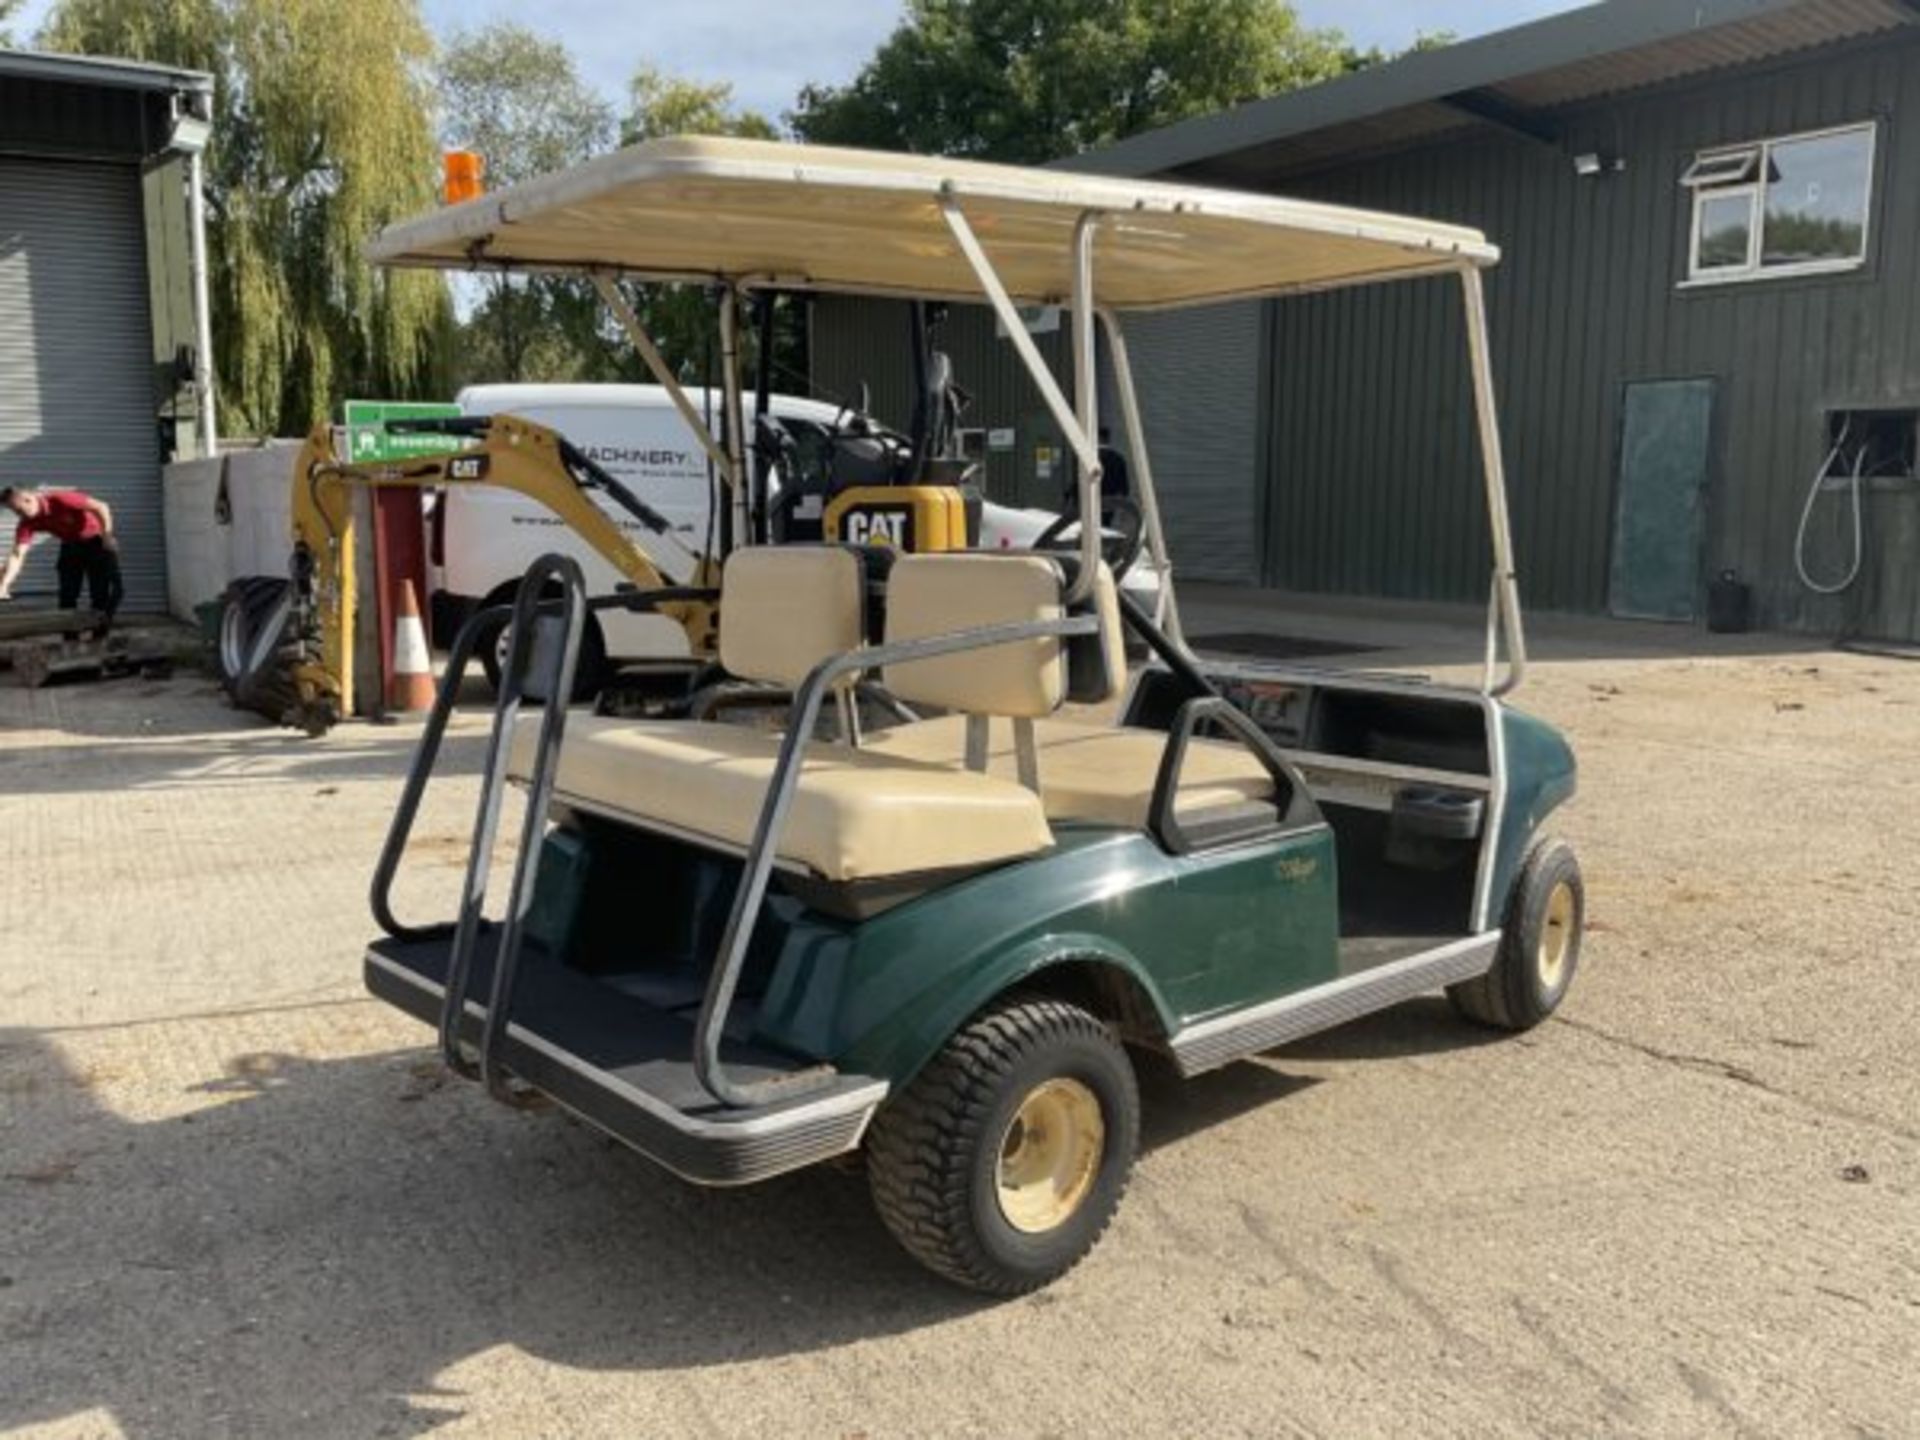 CLUB CAR VILLAGER GOLF BUGGY. PETROL. WINDSHIELD. 4 PASSENGERS. - Image 5 of 9